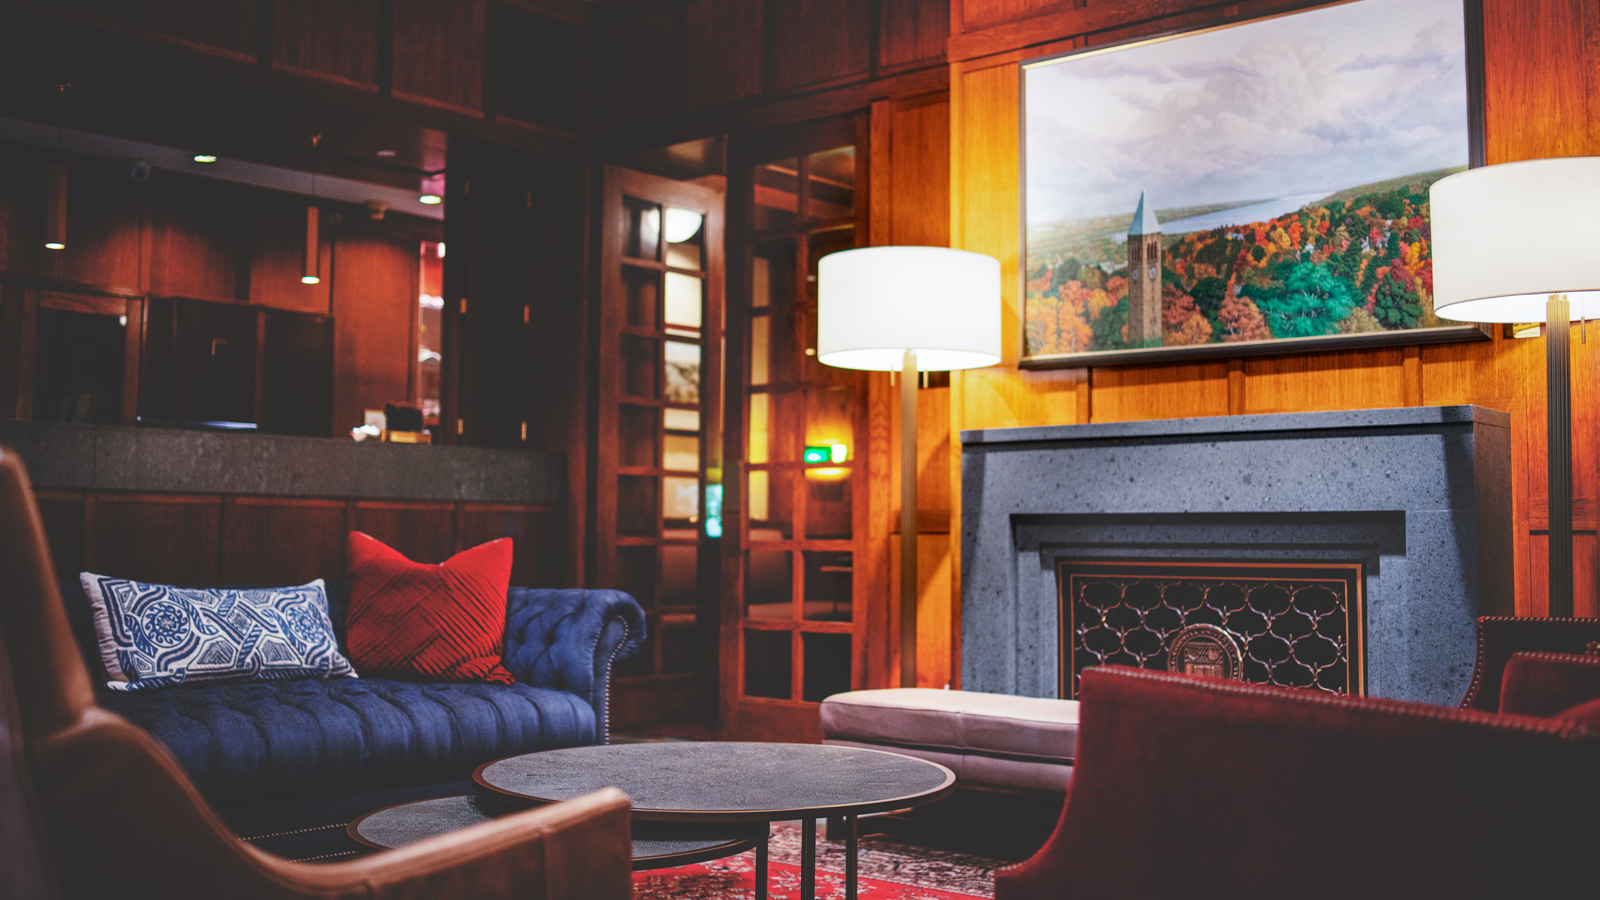 Colorful glimpses of the Ithaca campus appear throughout the Cornell Club, especially in the lobby